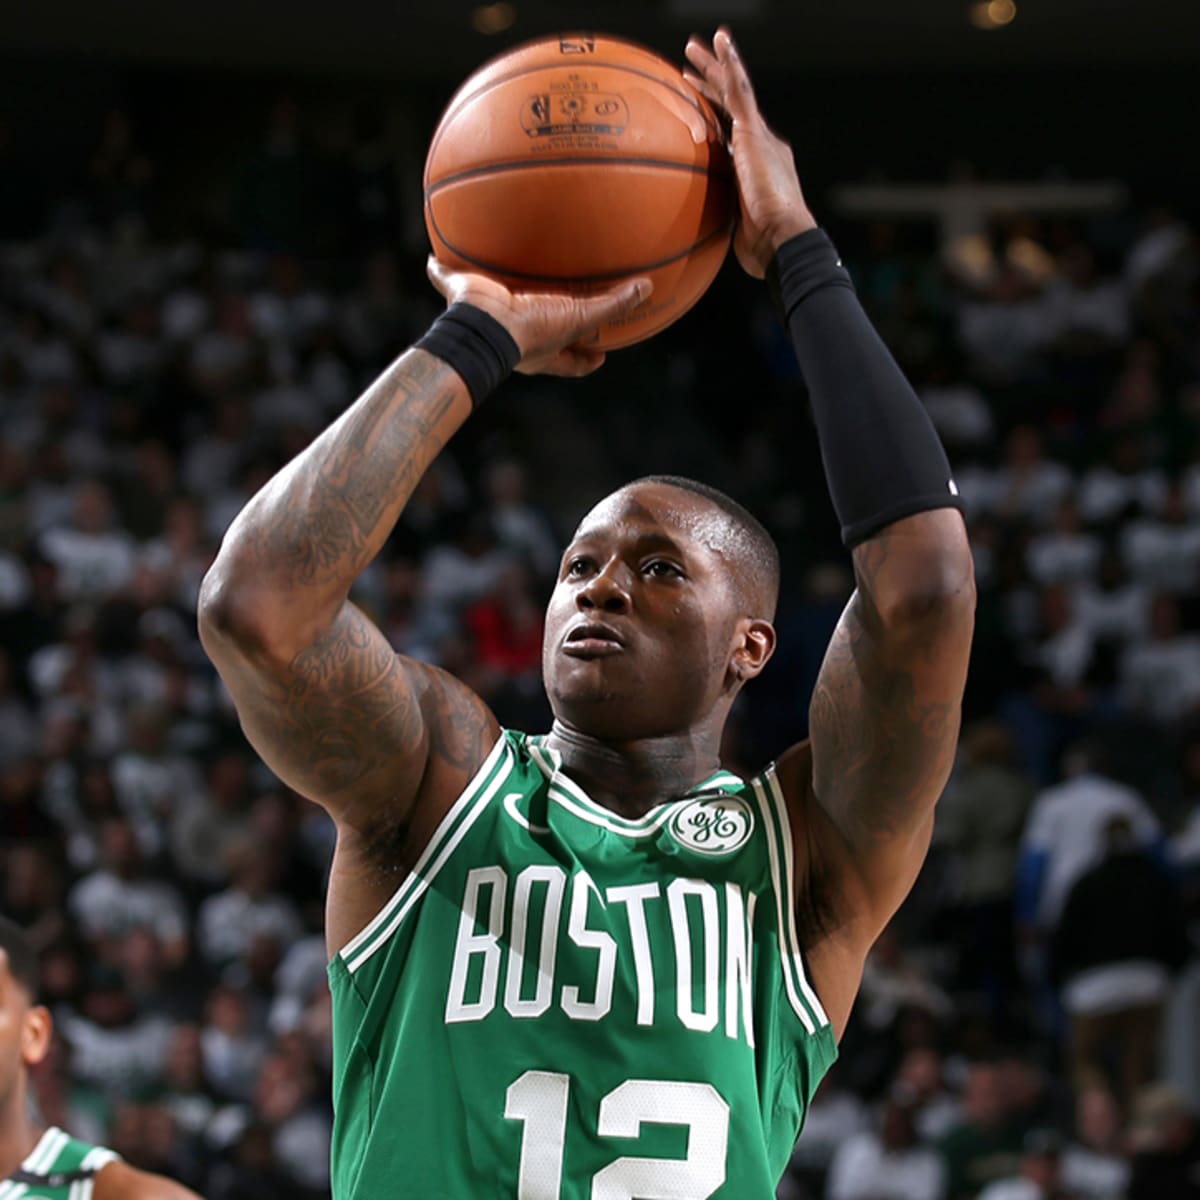 NBA Rumors: Spurs Trade For Hornets' Terry Rozier In Bold Proposal